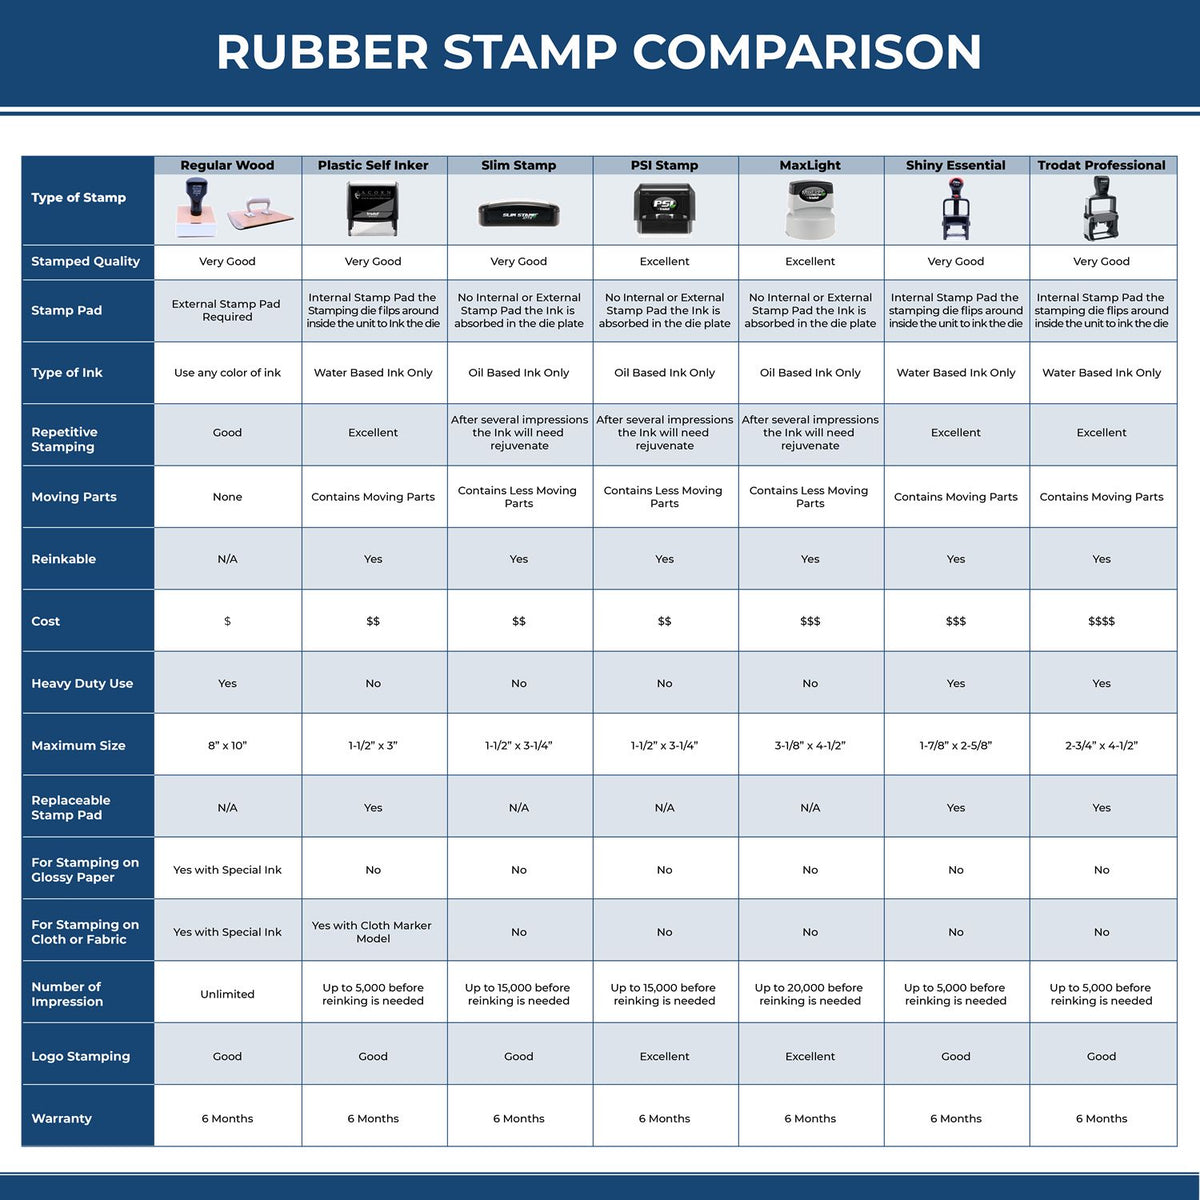 A comparison chart for the different types of mount models available for the Self-Inking New Hampshire PE Stamp.